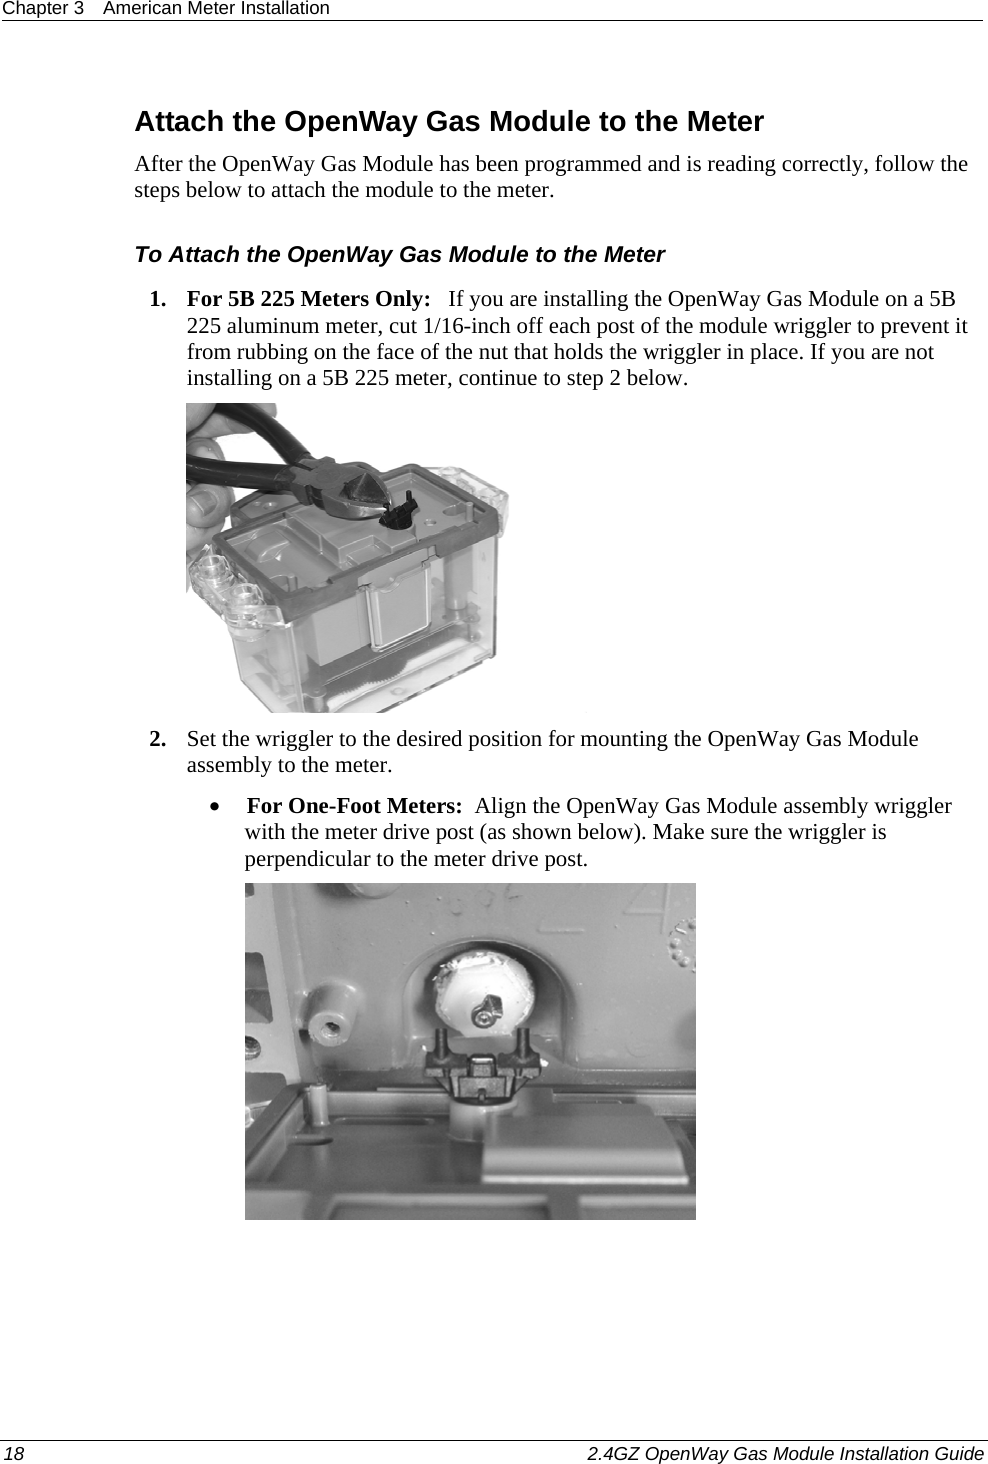 Chapter 3  American Meter Installation  18    2.4GZ OpenWay Gas Module Installation Guide    Attach the OpenWay Gas Module to the Meter After the OpenWay Gas Module has been programmed and is reading correctly, follow the steps below to attach the module to the meter. To Attach the OpenWay Gas Module to the Meter 1. For 5B 225 Meters Only:   If you are installing the OpenWay Gas Module on a 5B 225 aluminum meter, cut 1/16-inch off each post of the module wriggler to prevent it from rubbing on the face of the nut that holds the wriggler in place. If you are not installing on a 5B 225 meter, continue to step 2 below.   2. Set the wriggler to the desired position for mounting the OpenWay Gas Module assembly to the meter.  • For One-Foot Meters:  Align the OpenWay Gas Module assembly wriggler with the meter drive post (as shown below). Make sure the wriggler is perpendicular to the meter drive post.   